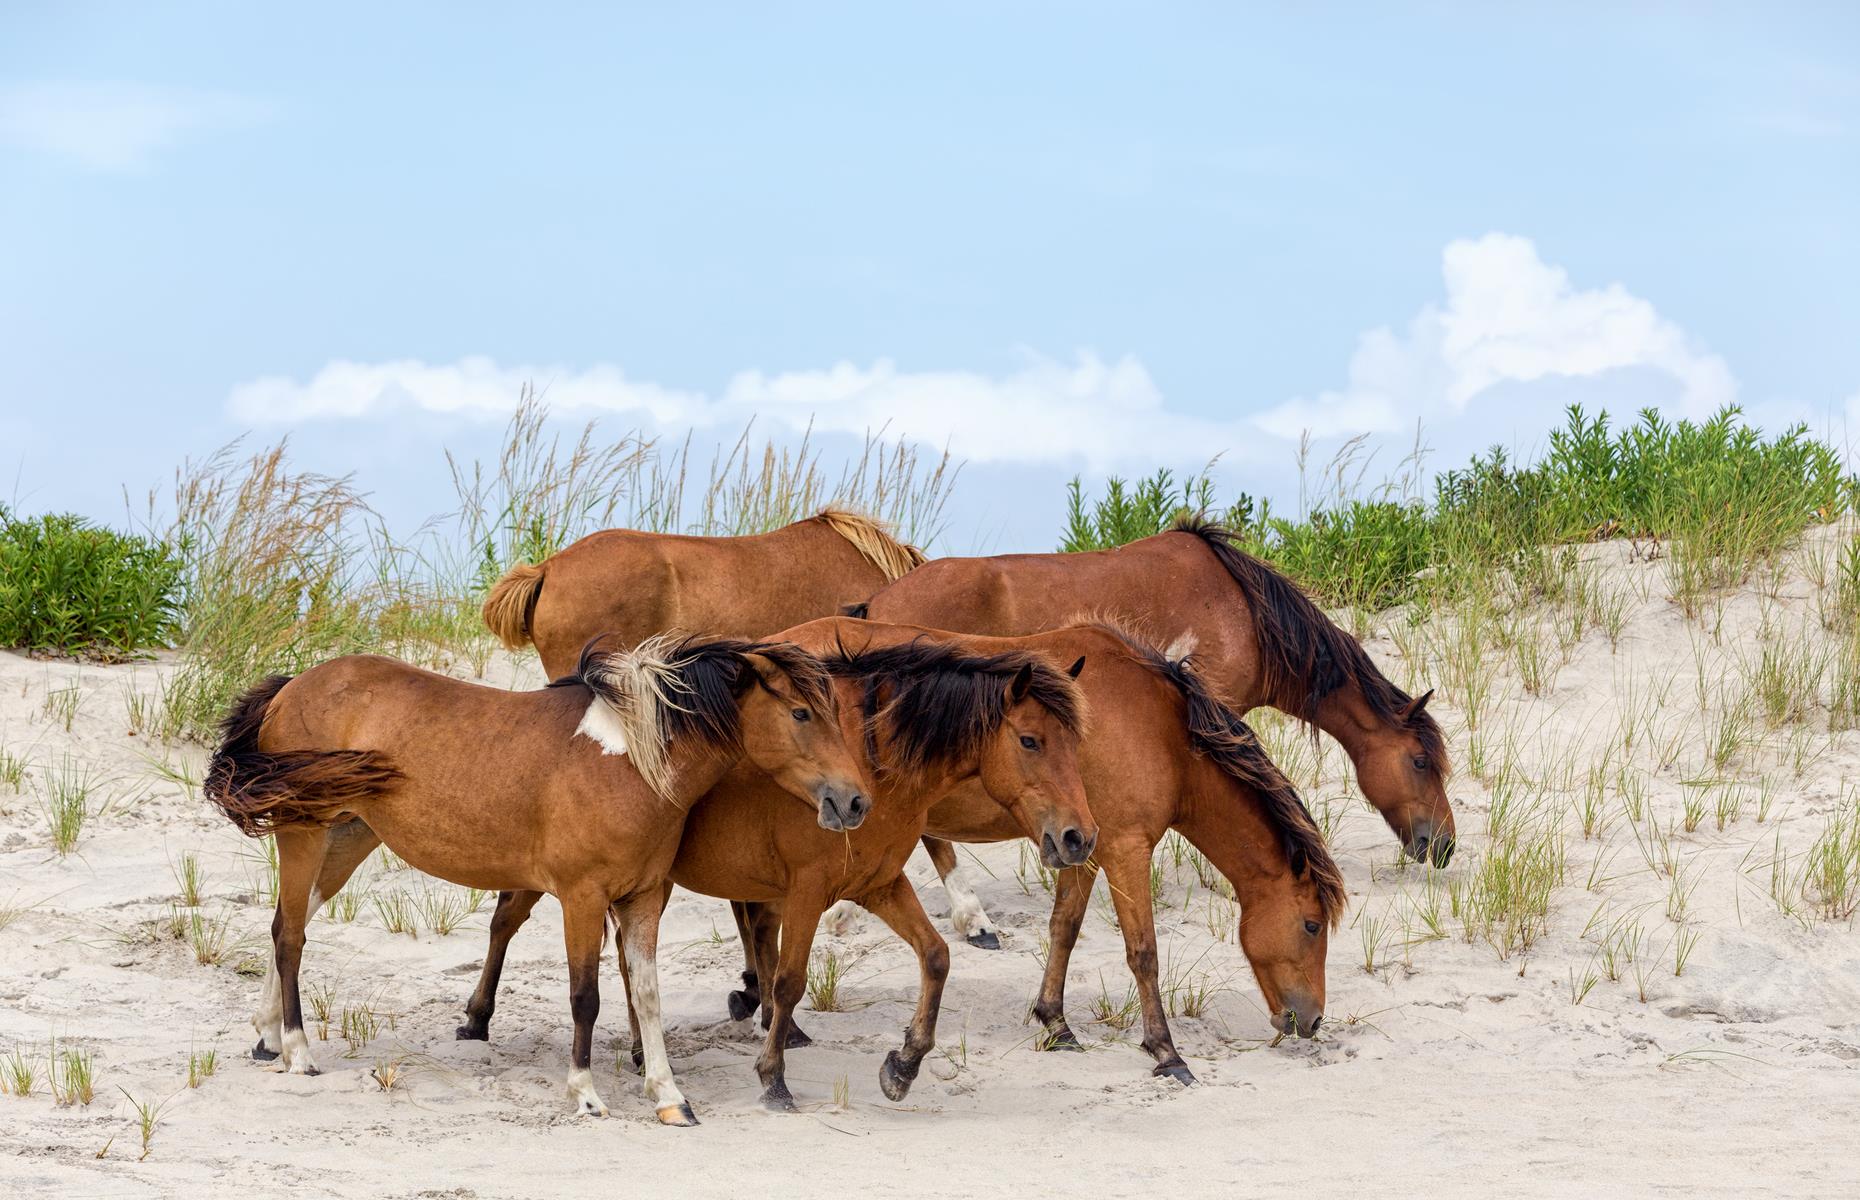 <p>Wild horses gathered at the water's edge or wandering through sands peppered with beach grass, is the image that draws most to <a href="https://www.nps.gov/asis/index.htm">this windswept barrier island</a>. But even without these elegant creatures, there's plenty for visitors to discover. Trails lead hikers through forests, marshes and dunes and, for a true back-to-nature experience, you can camp in the site's rugged backcountry.</p>